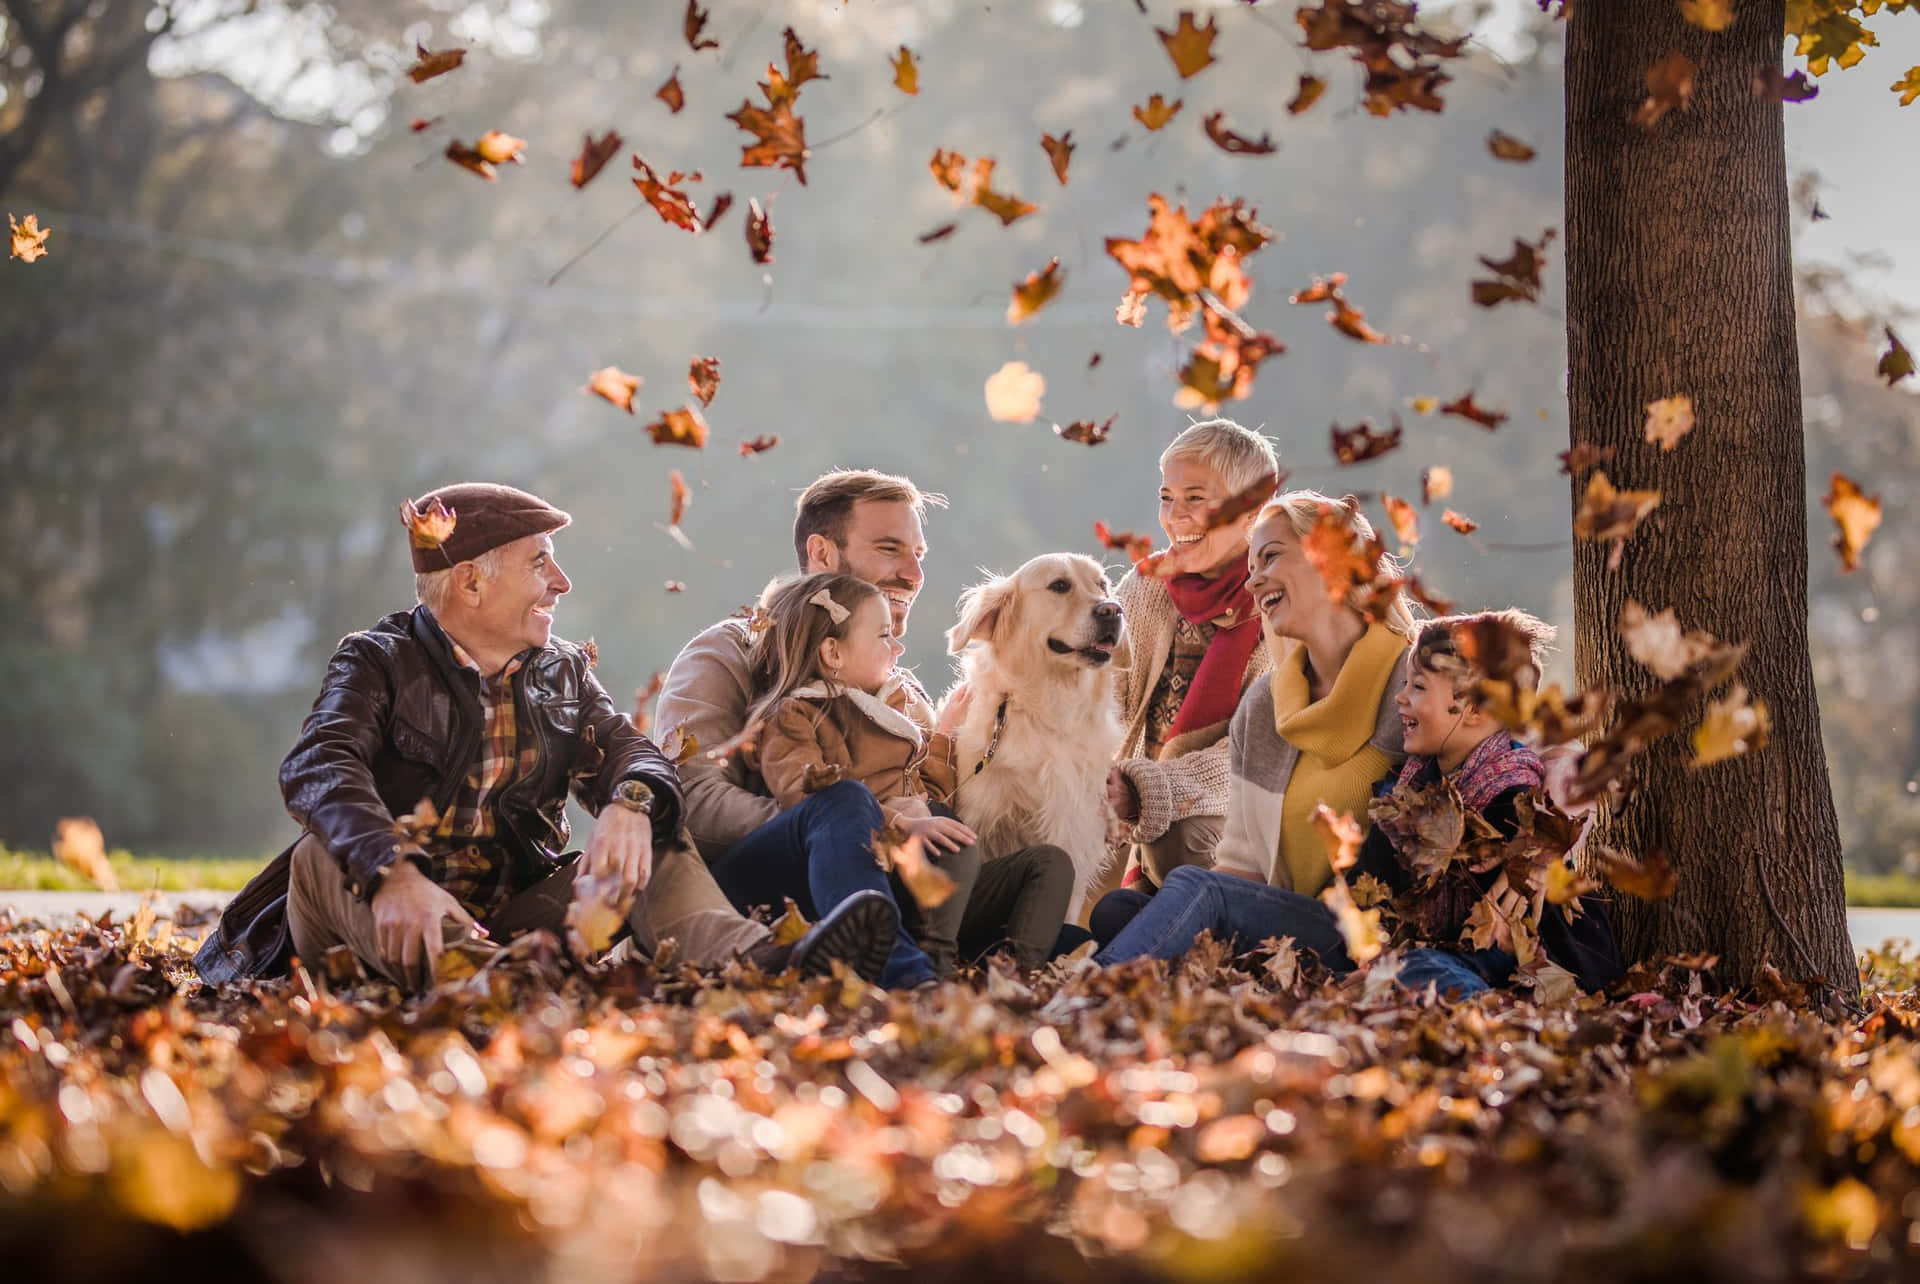 Celebrate the fall season with your family